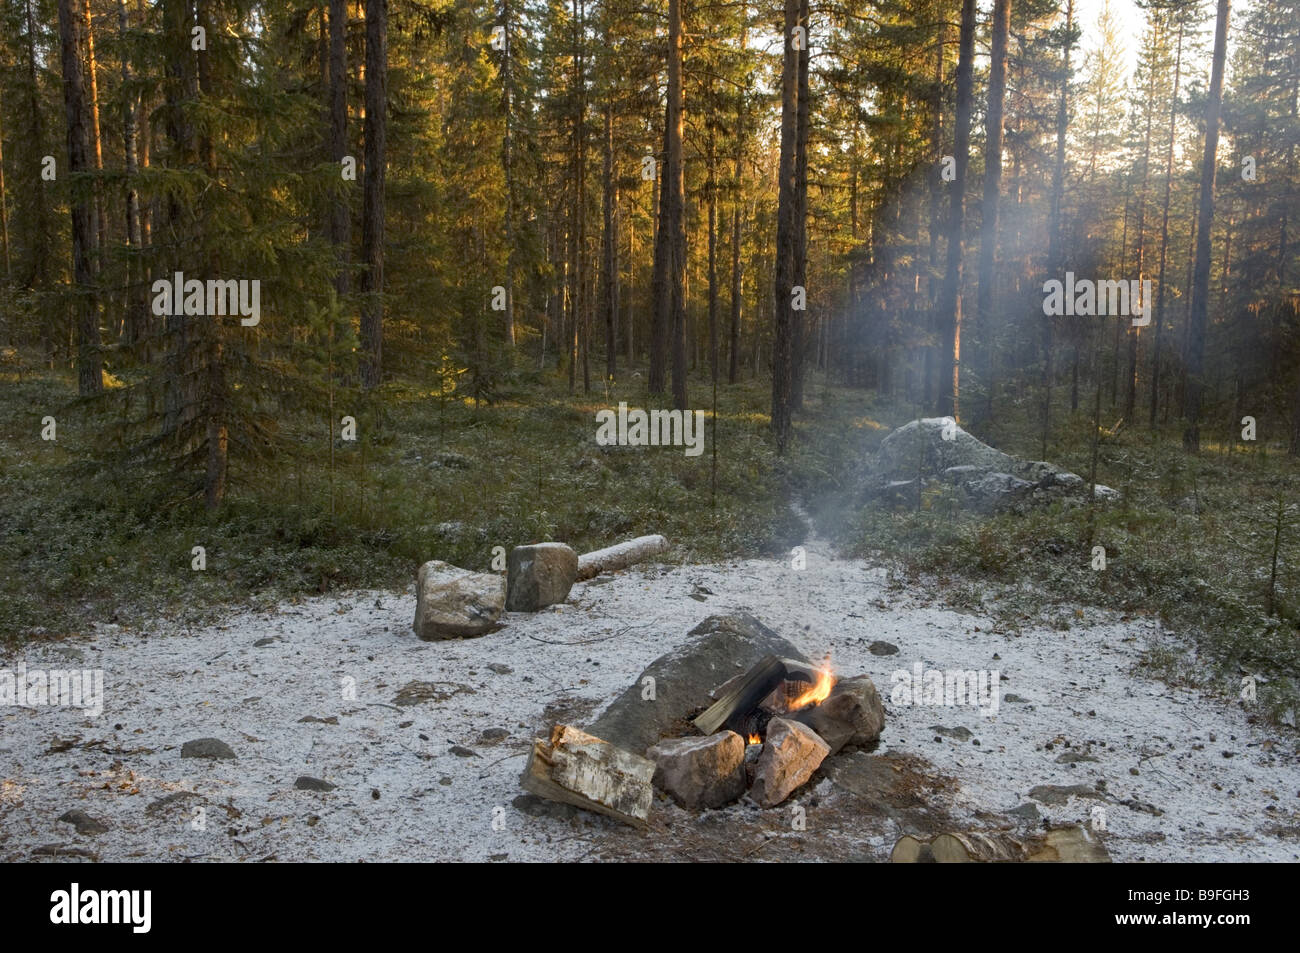 Sweden Muddus National park forest hearth late-night-autumn  Isolation burning trees loneliness fires hearth flames frost Stock Photo